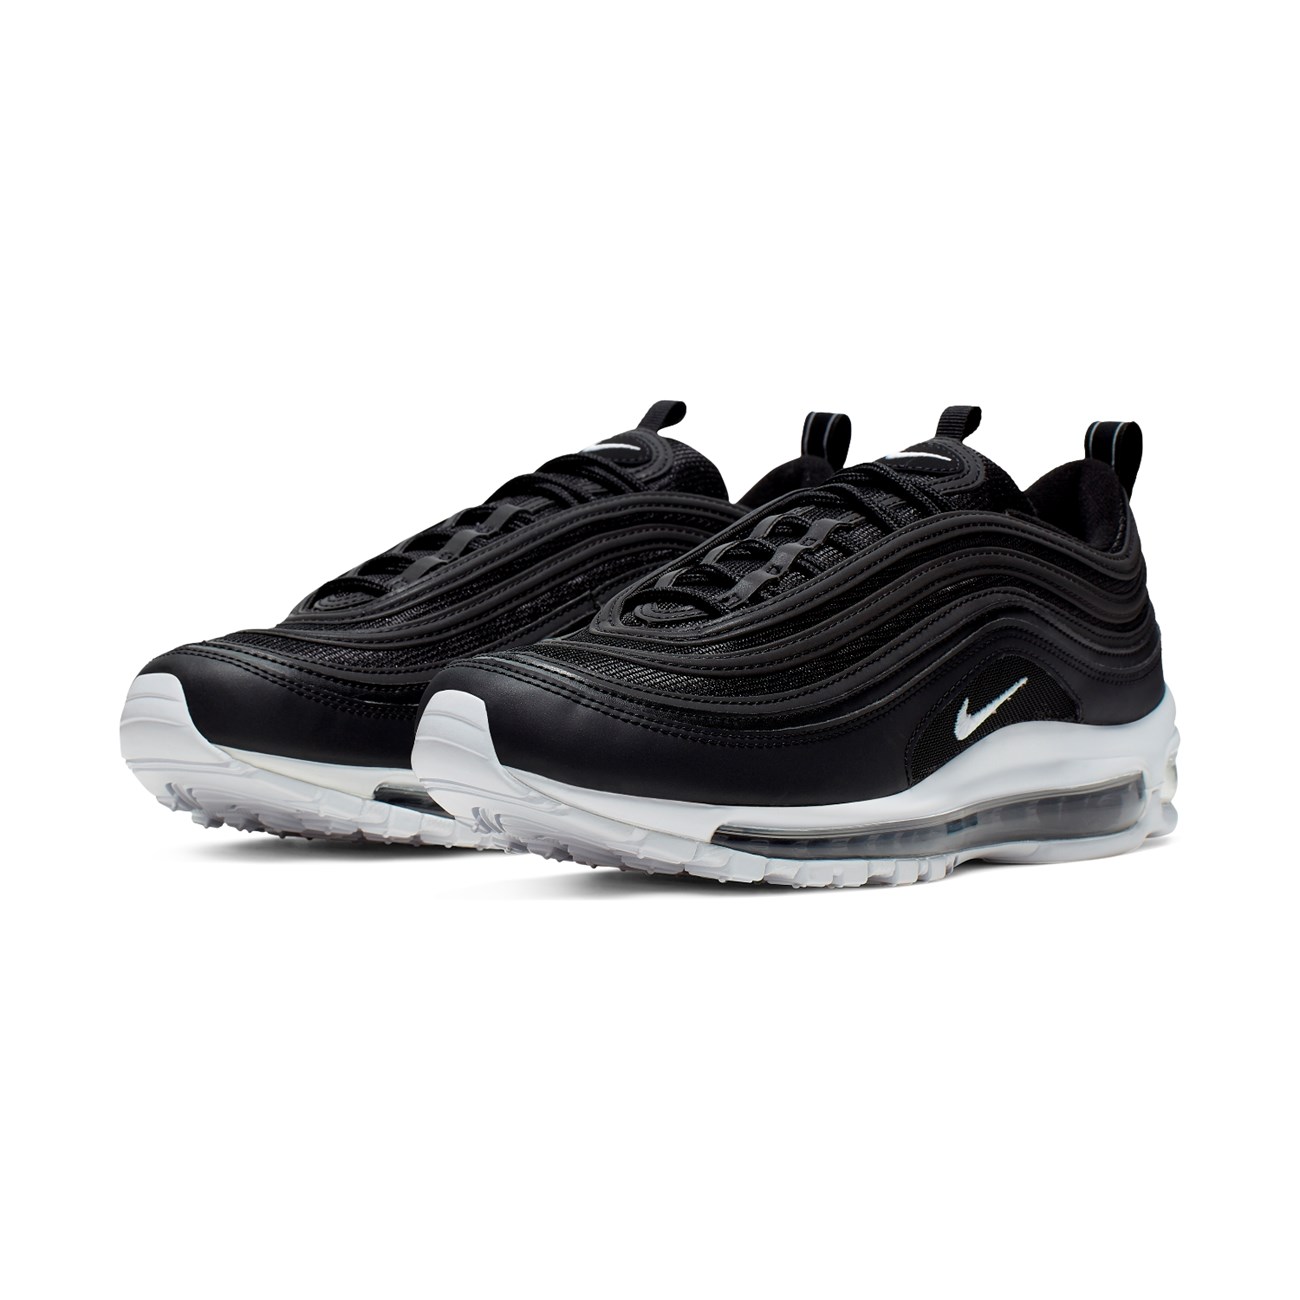 NIKE Ανδρικά Sneakers Air Max 97 921826-001 - The Athlete's Foot